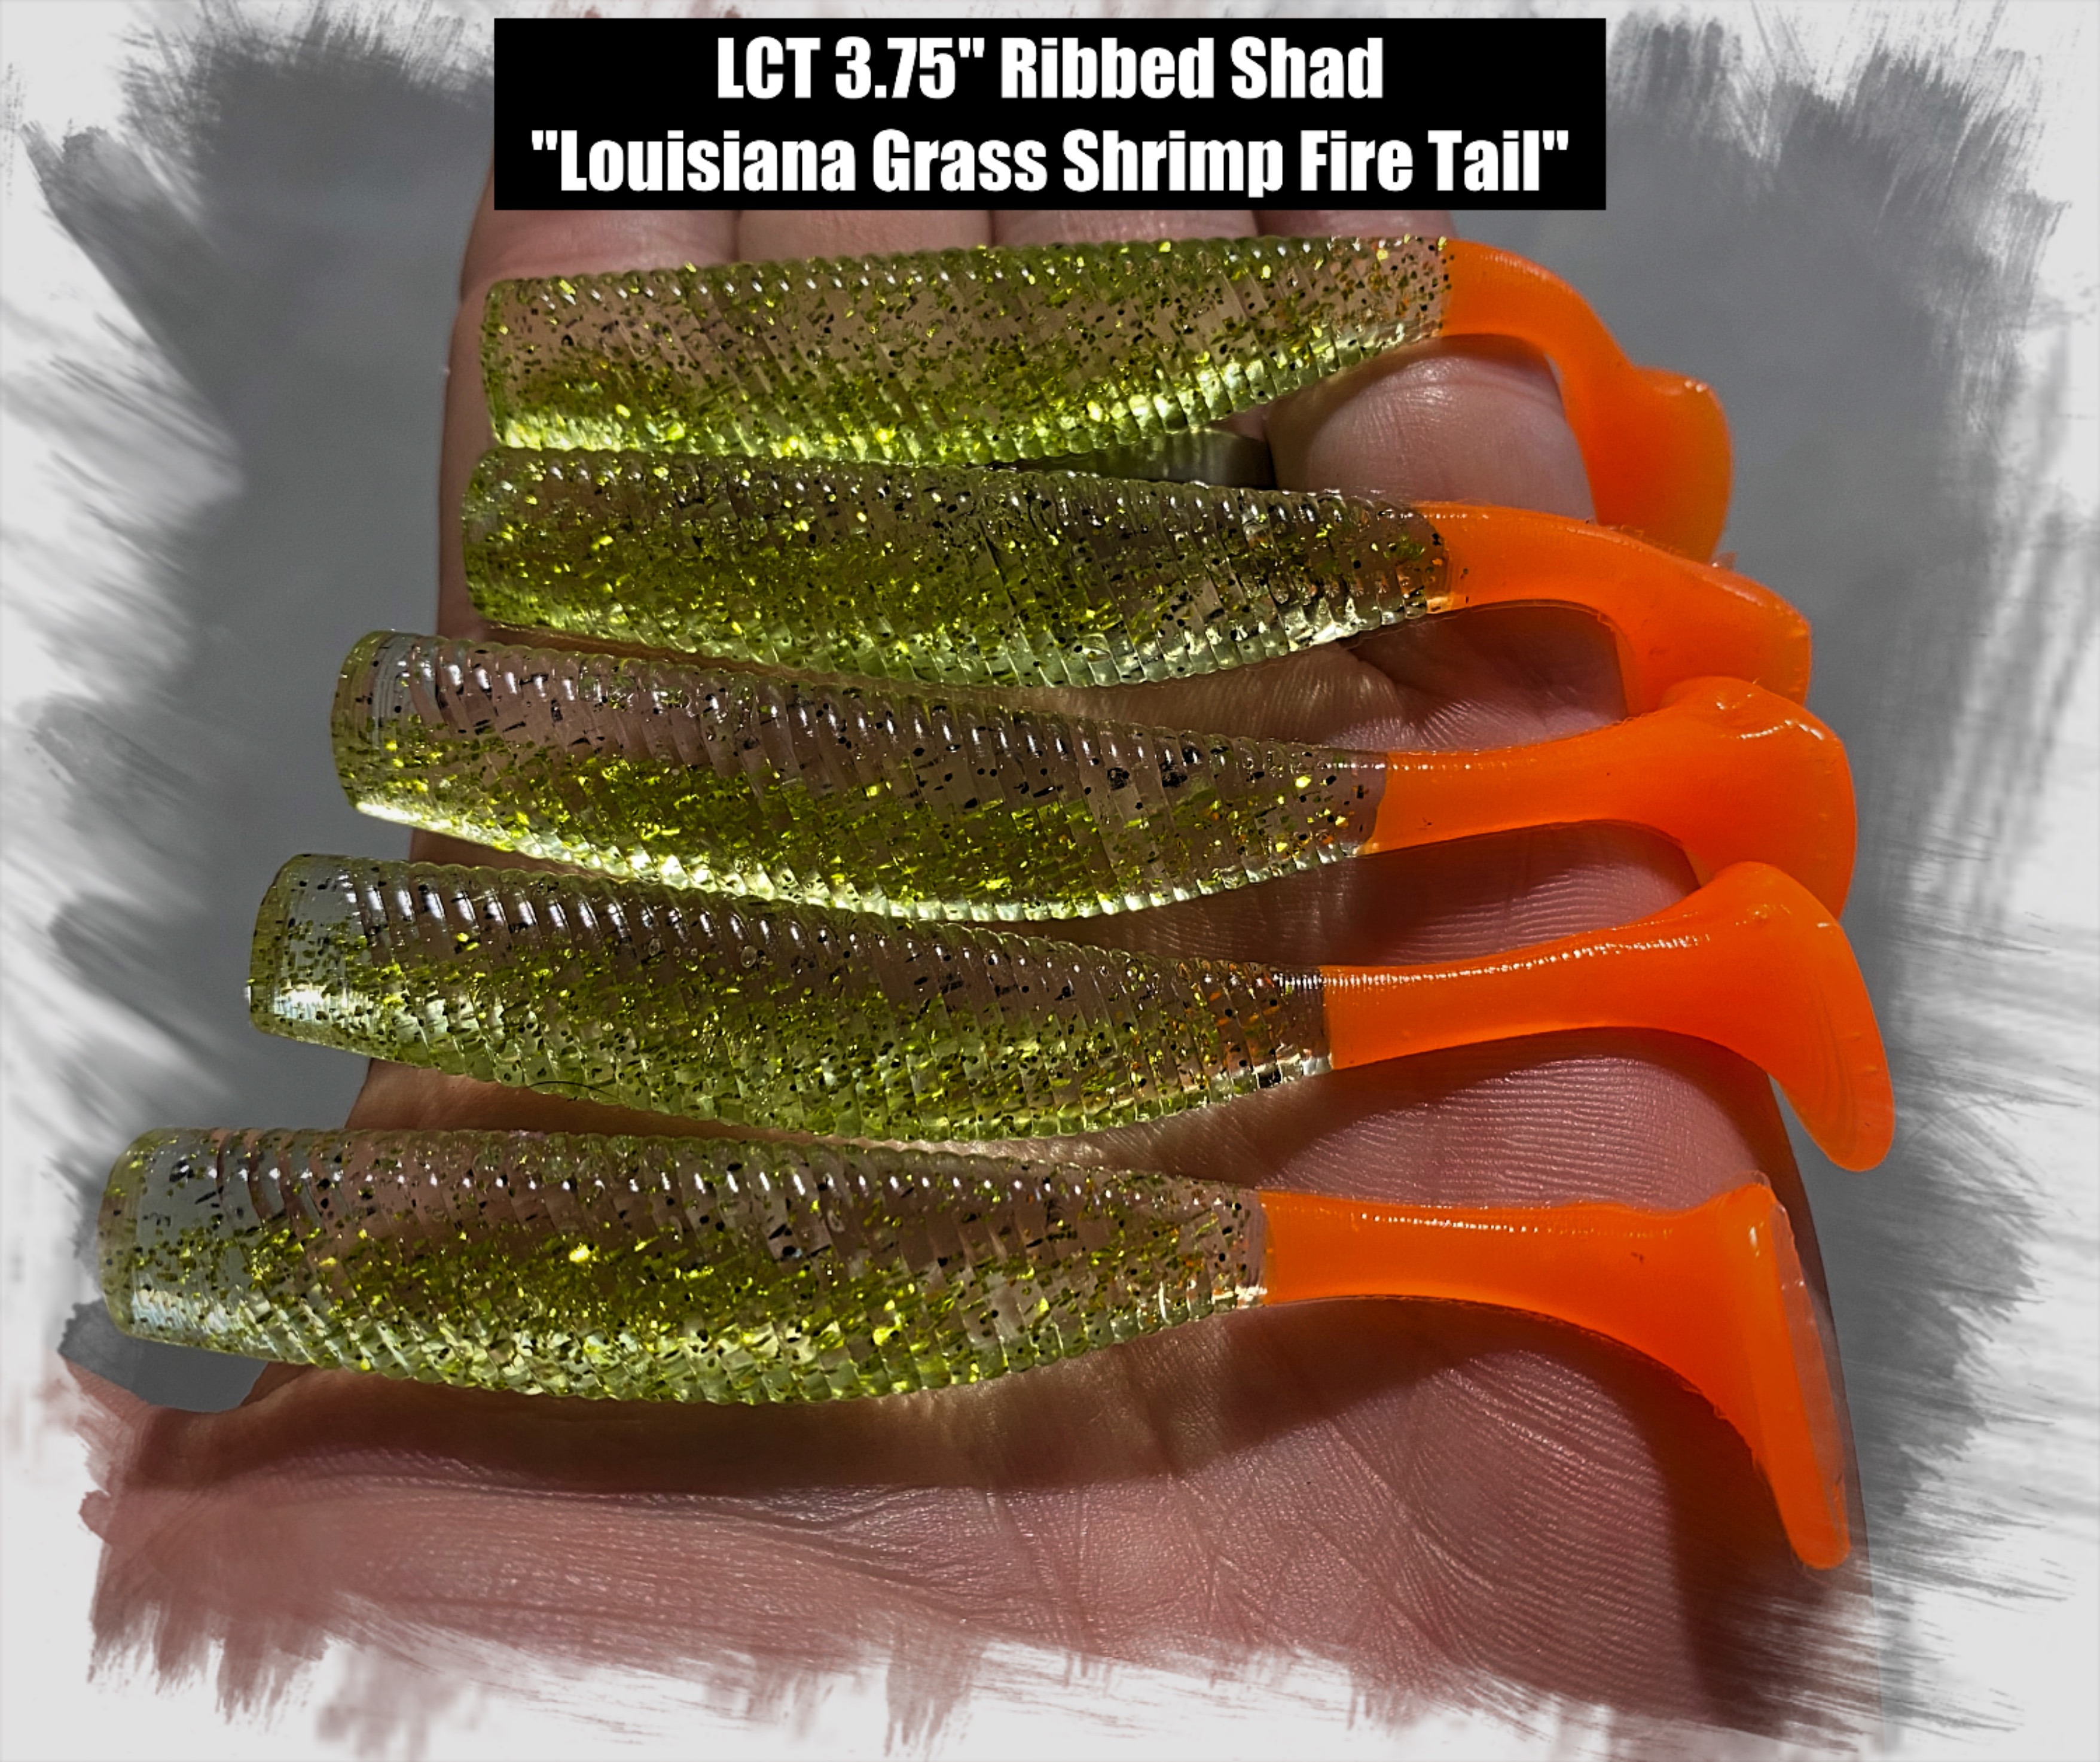 Shad - Ribbed Thumper 5'' and 3.5